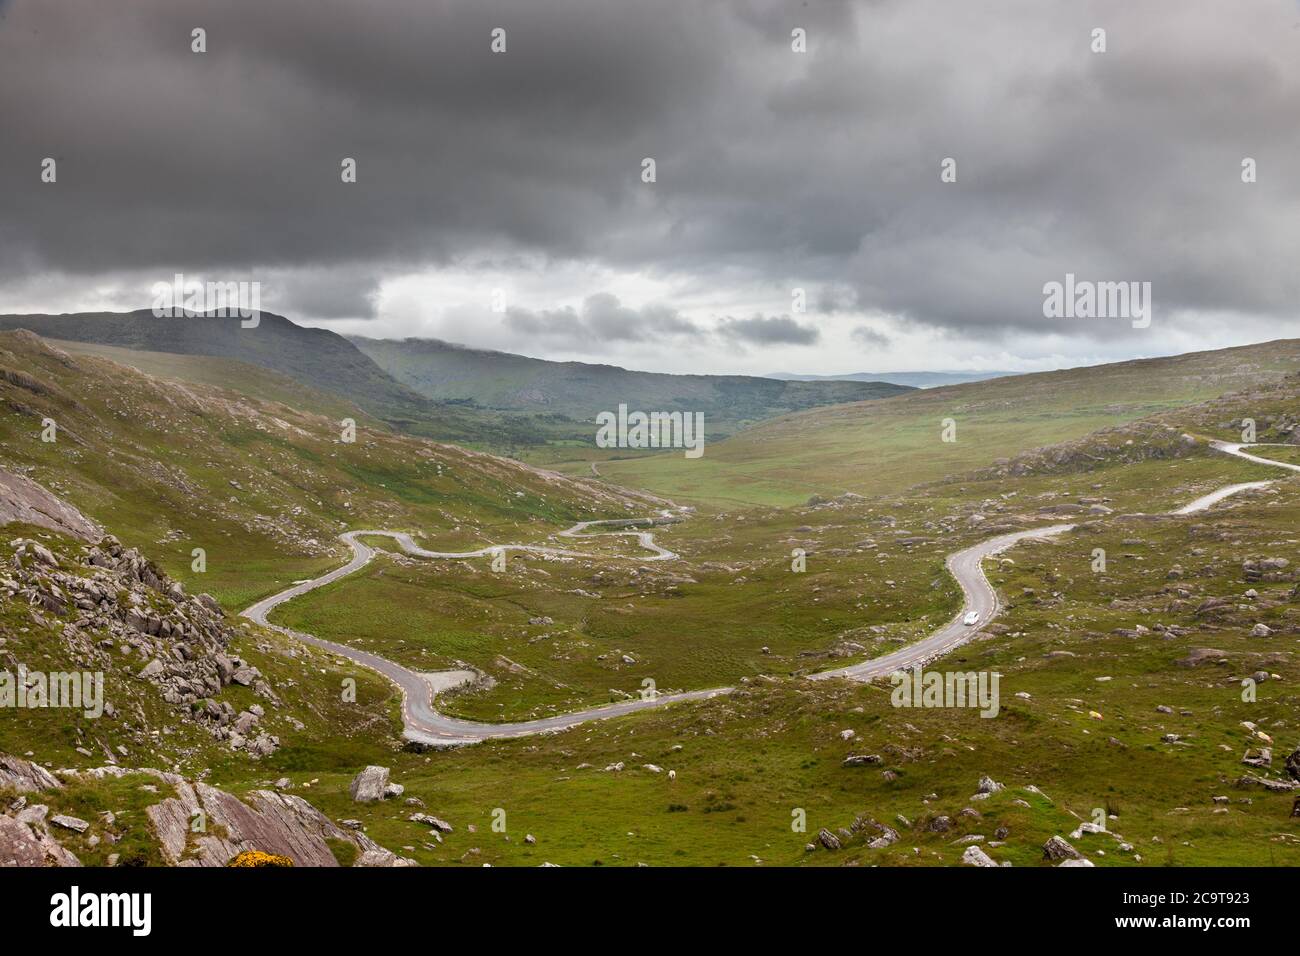 Healy Pass, Cork, Ireland. 01st August, 2020. A view of the winding road to the summit of the Healy Pass in West Cork, Ireland. - Credit; David Creedo Stock Photo